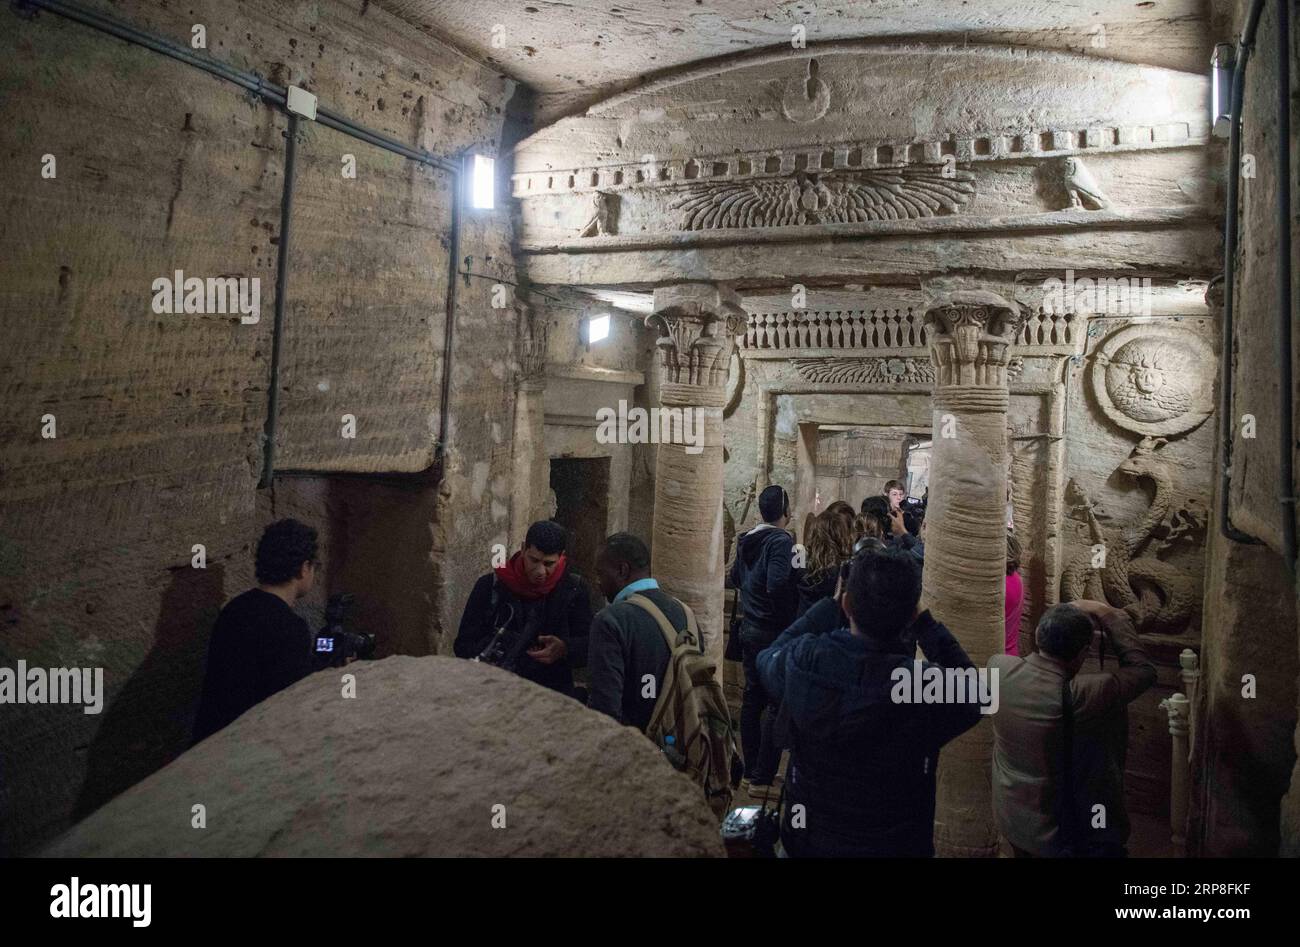 (190303) -- ALEXANDRIA (EGYPT), March 3, 2019 -- Photo taken on March 3, 2019 shows the catacombs of ancient Kom al-Shoqafa tombs in the northern seaside Alexandria province, Egypt. The Egyptian Ministry of Antiquities celebrated on Sunday the completion of a project removing underground water from 2,000-year-old catacombs in the northern seaside province of Alexandria dating back to the Greco-Roman era. ) EGYPT-ALEXANDRIA-GRECO-ROMAN CATACOMBS WuxHuiwo PUBLICATIONxNOTxINxCHN Stock Photo